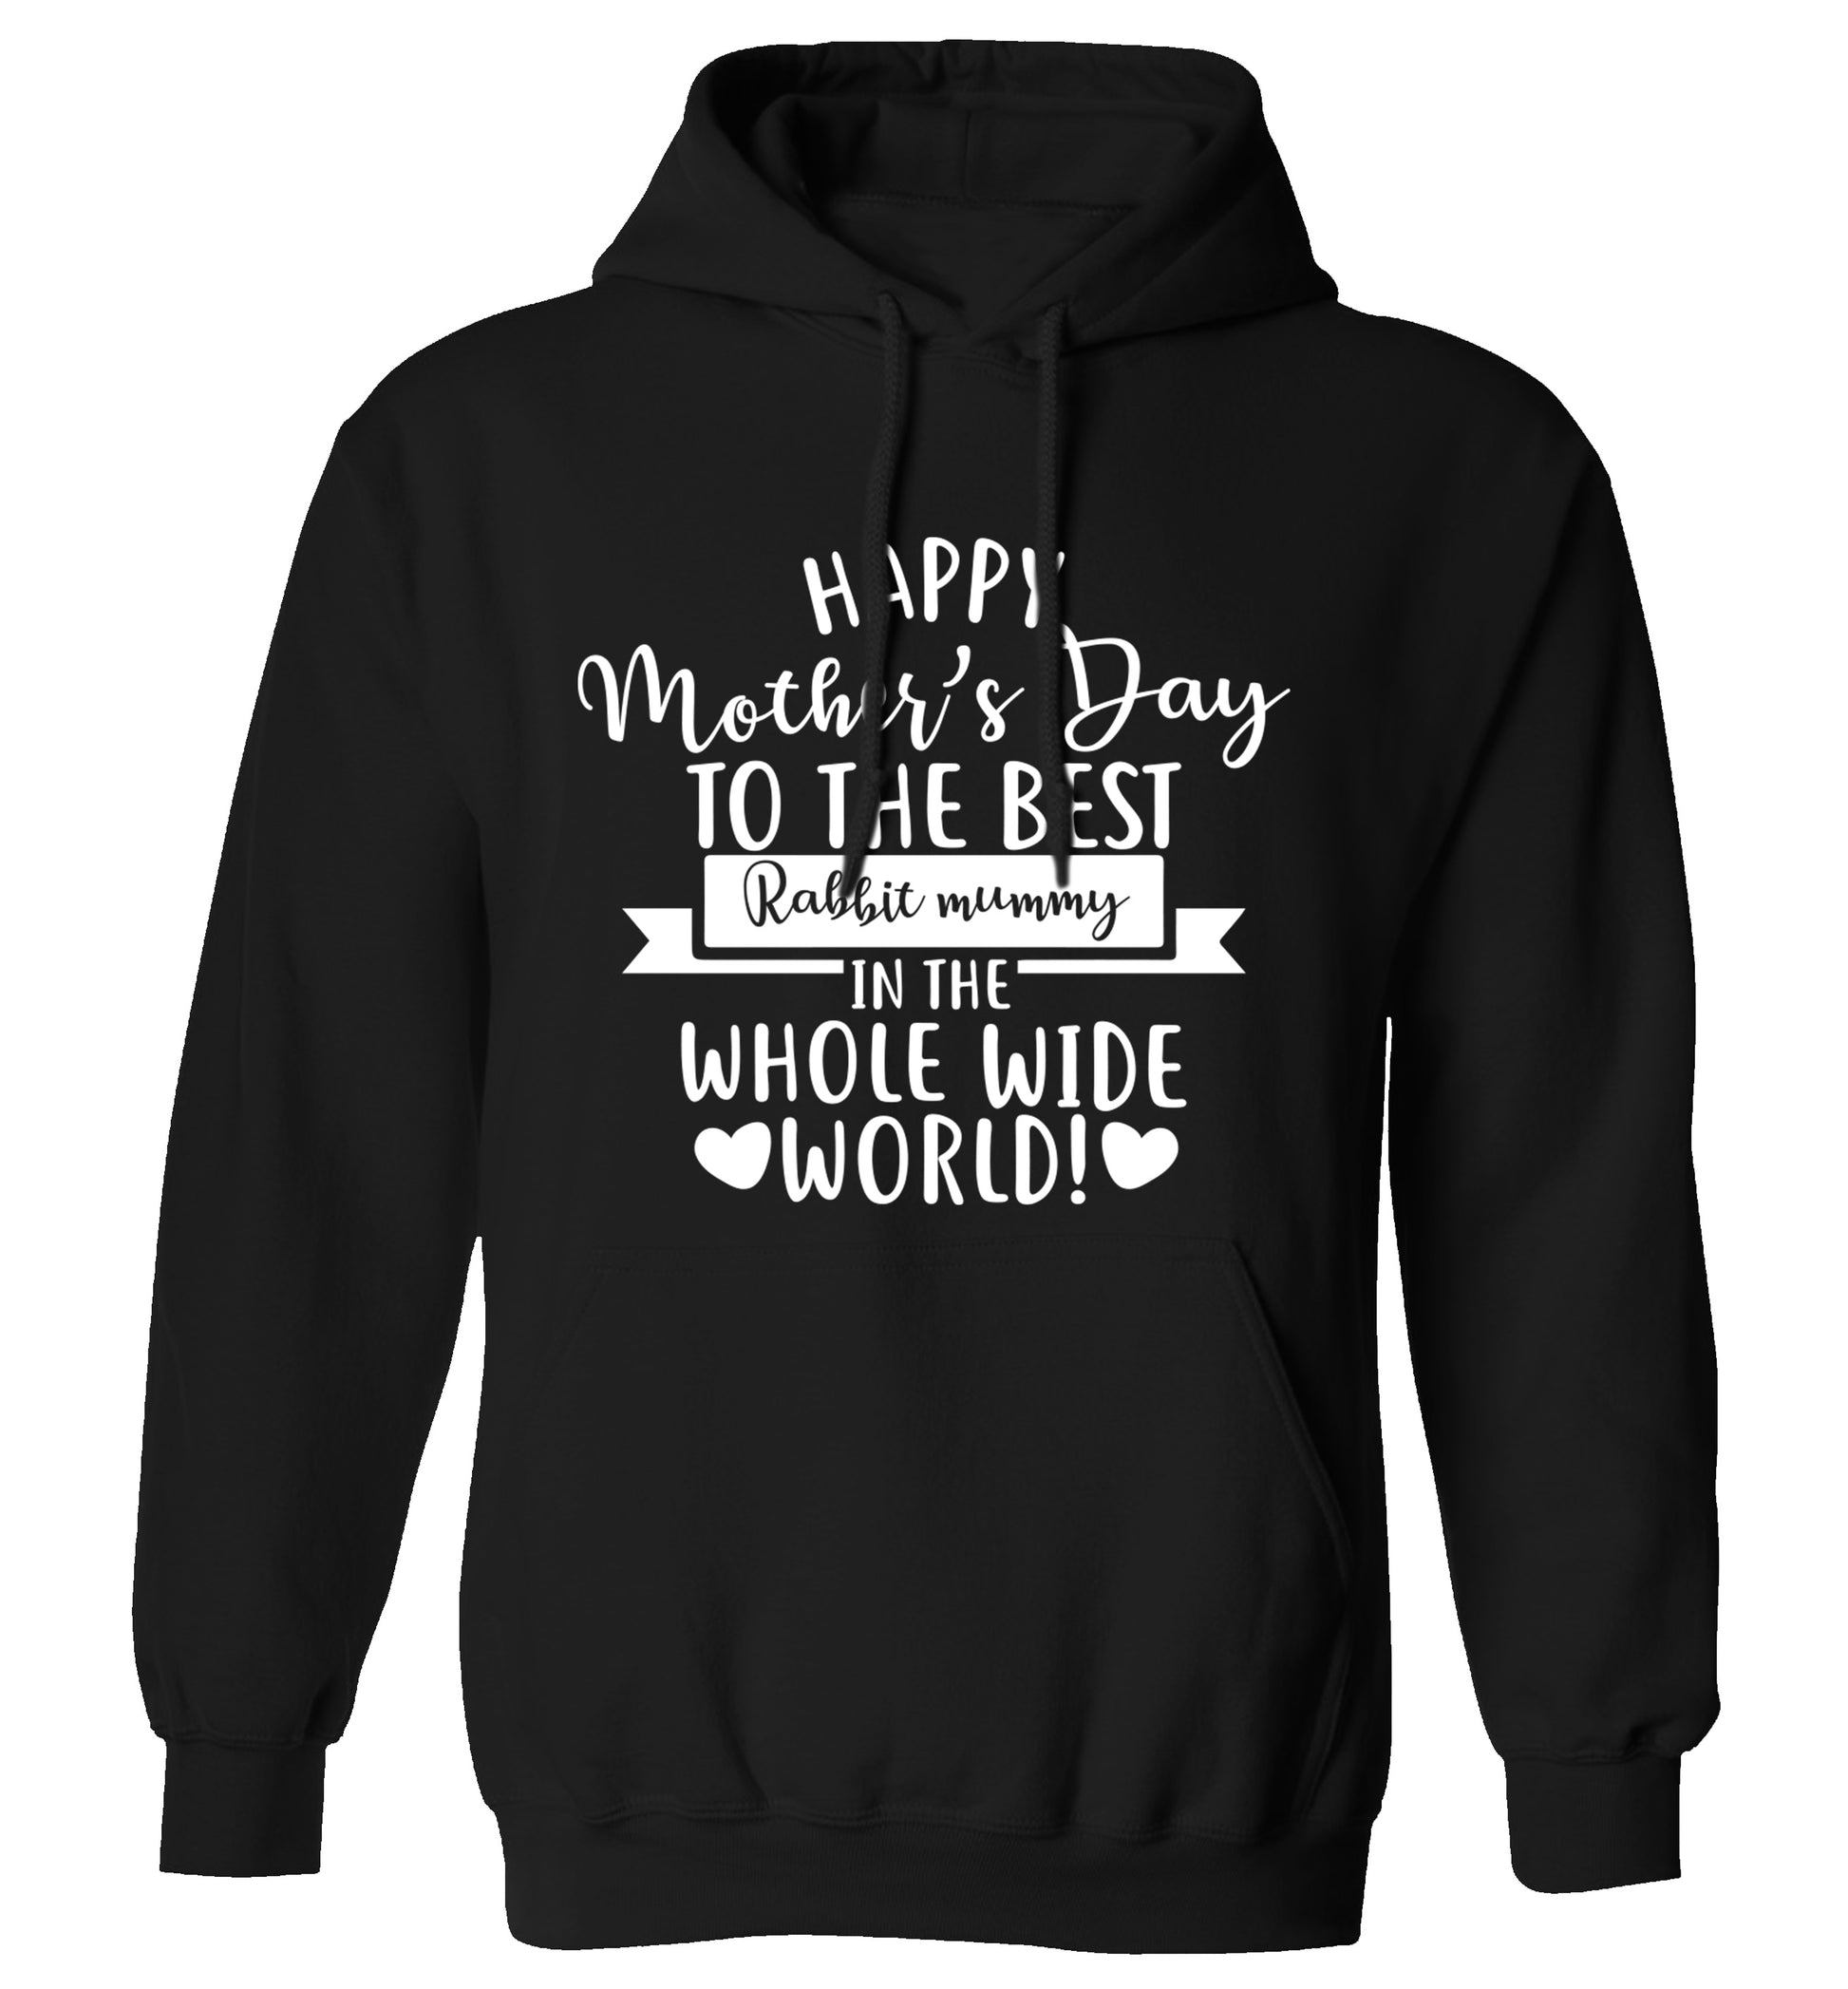 Happy mother's day to the best rabbit mummy in the world adults unisex black hoodie 2XL